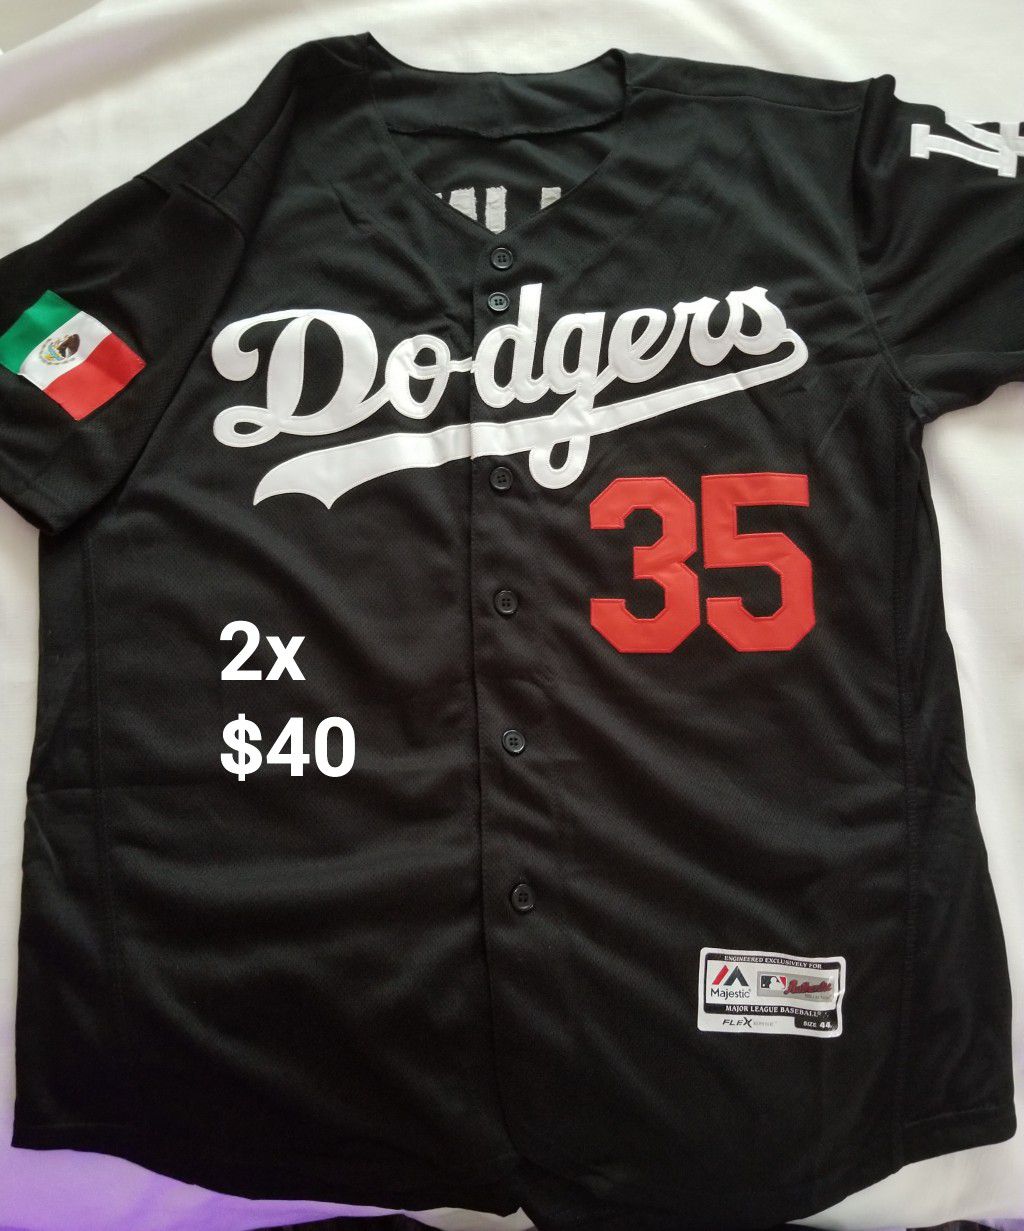 Dodgers cody bellinger viva mexico edition jersey